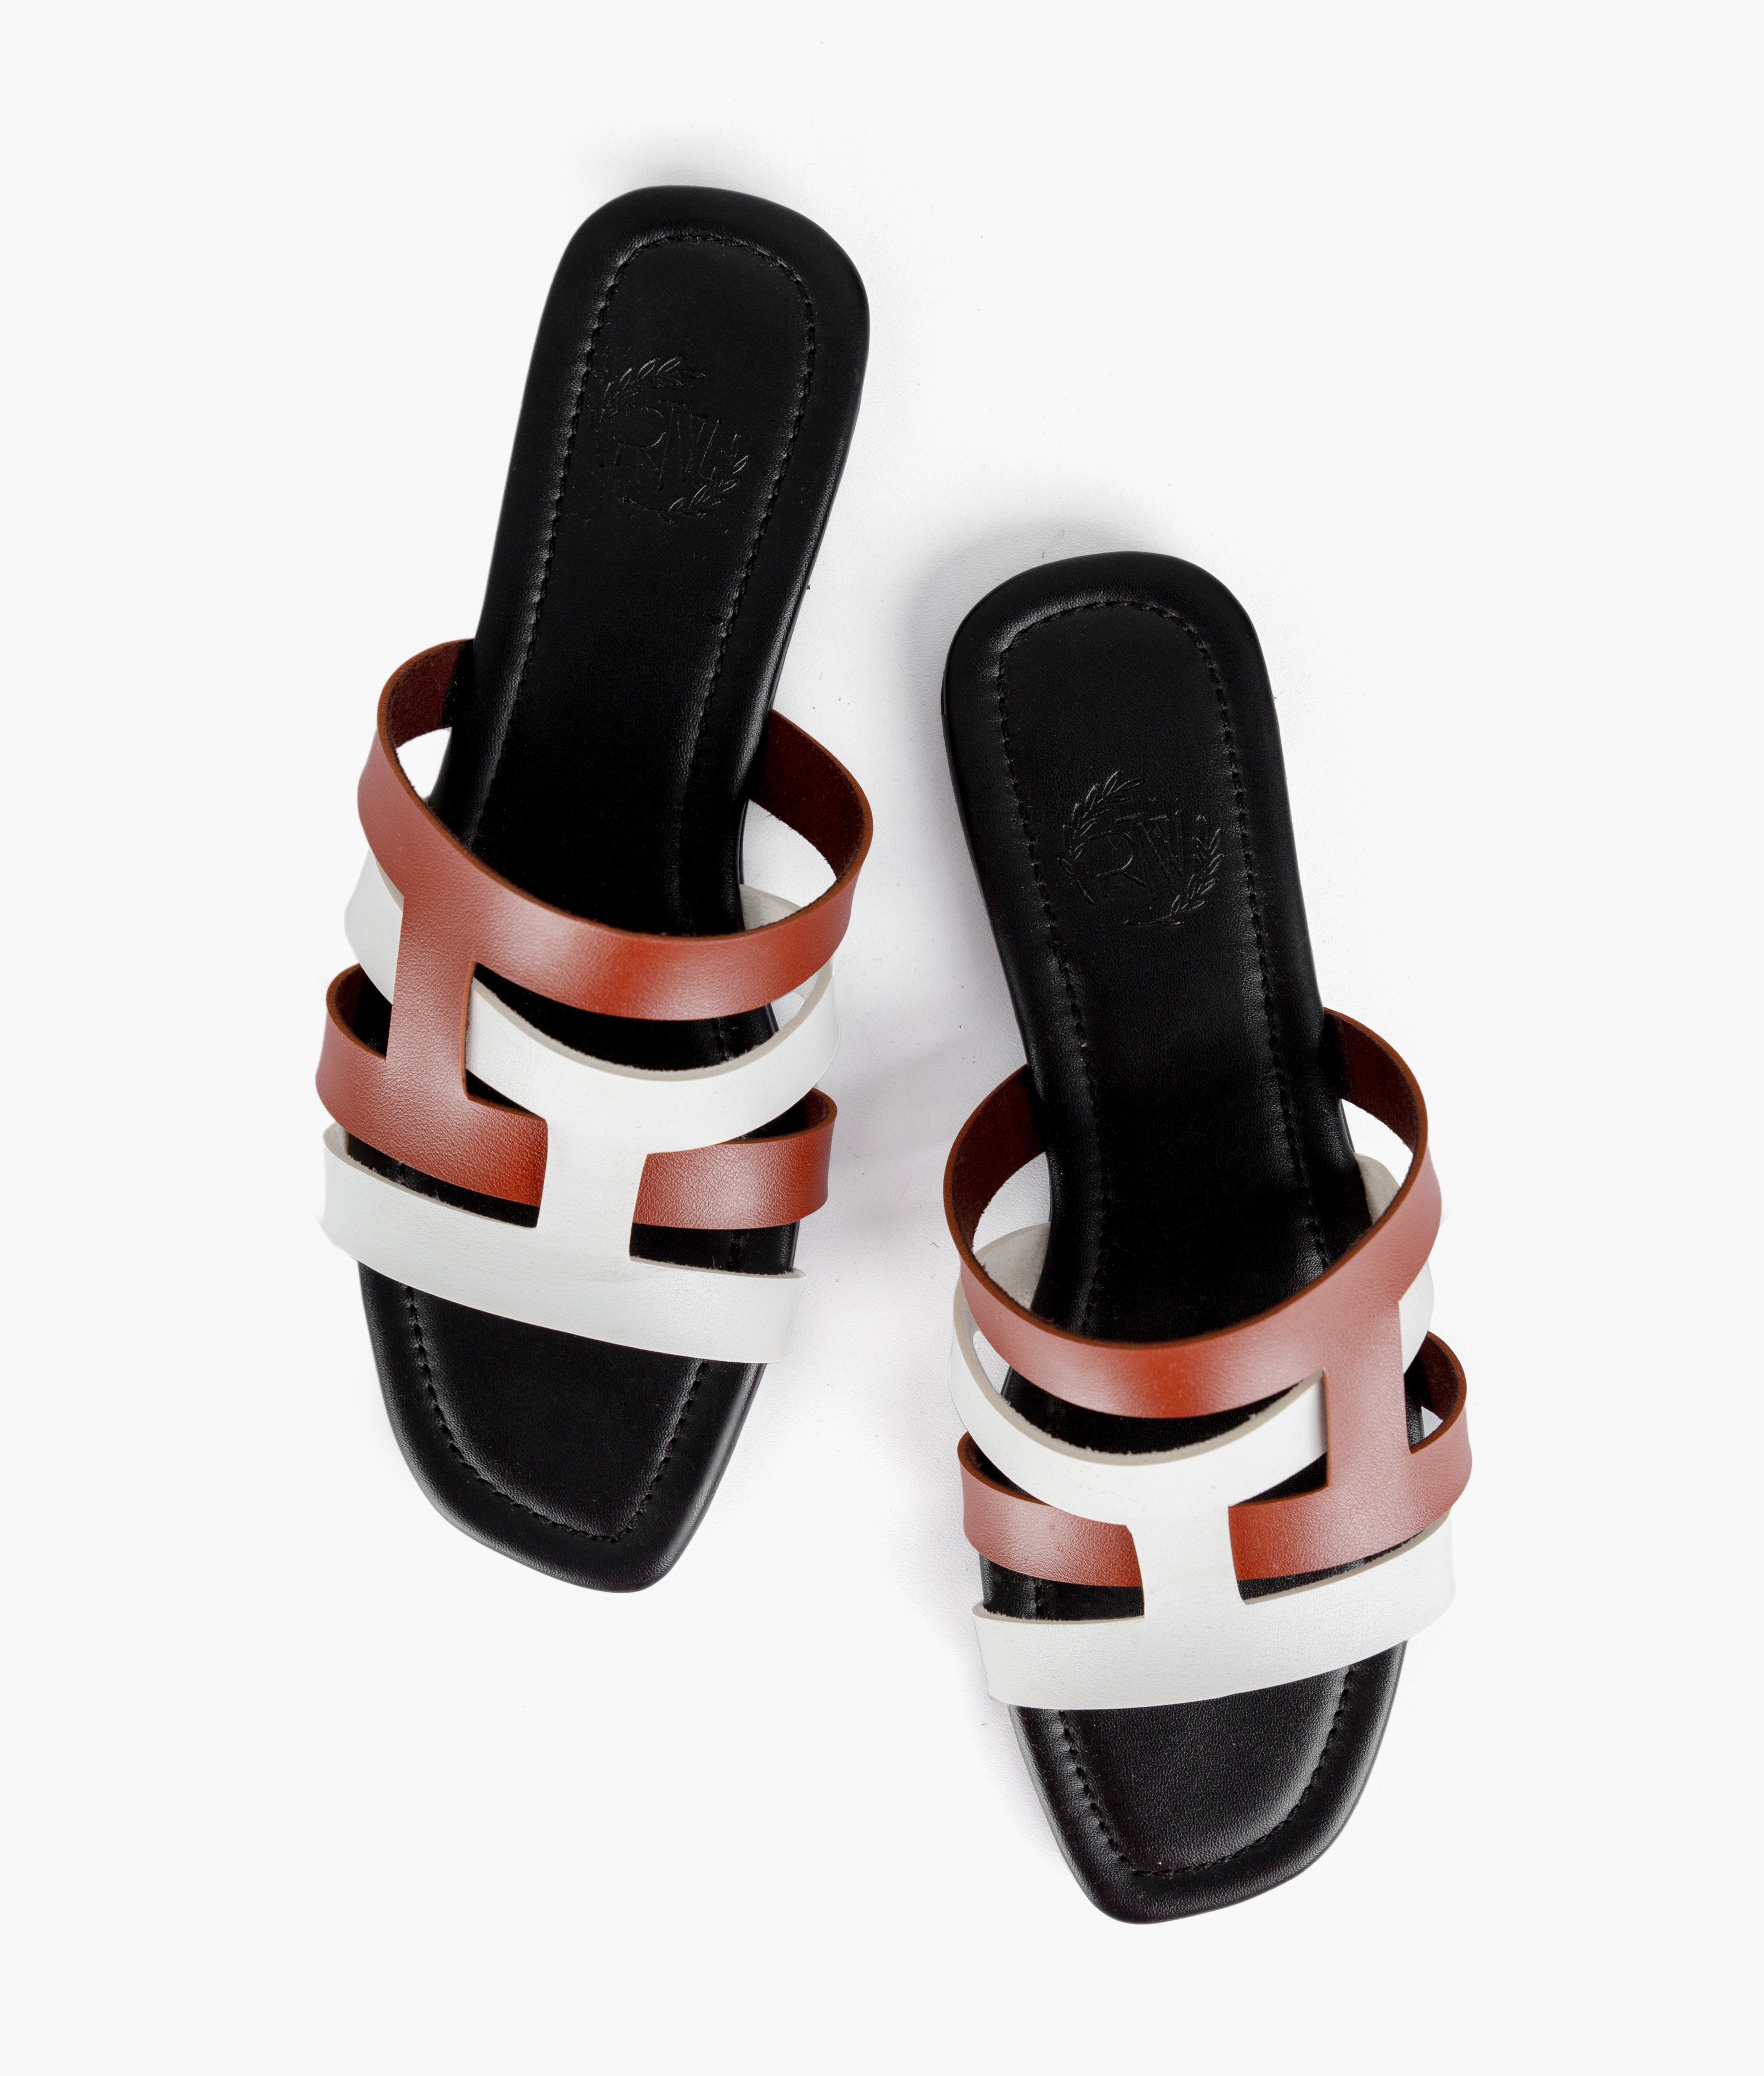 Rust and white color-blocking flats